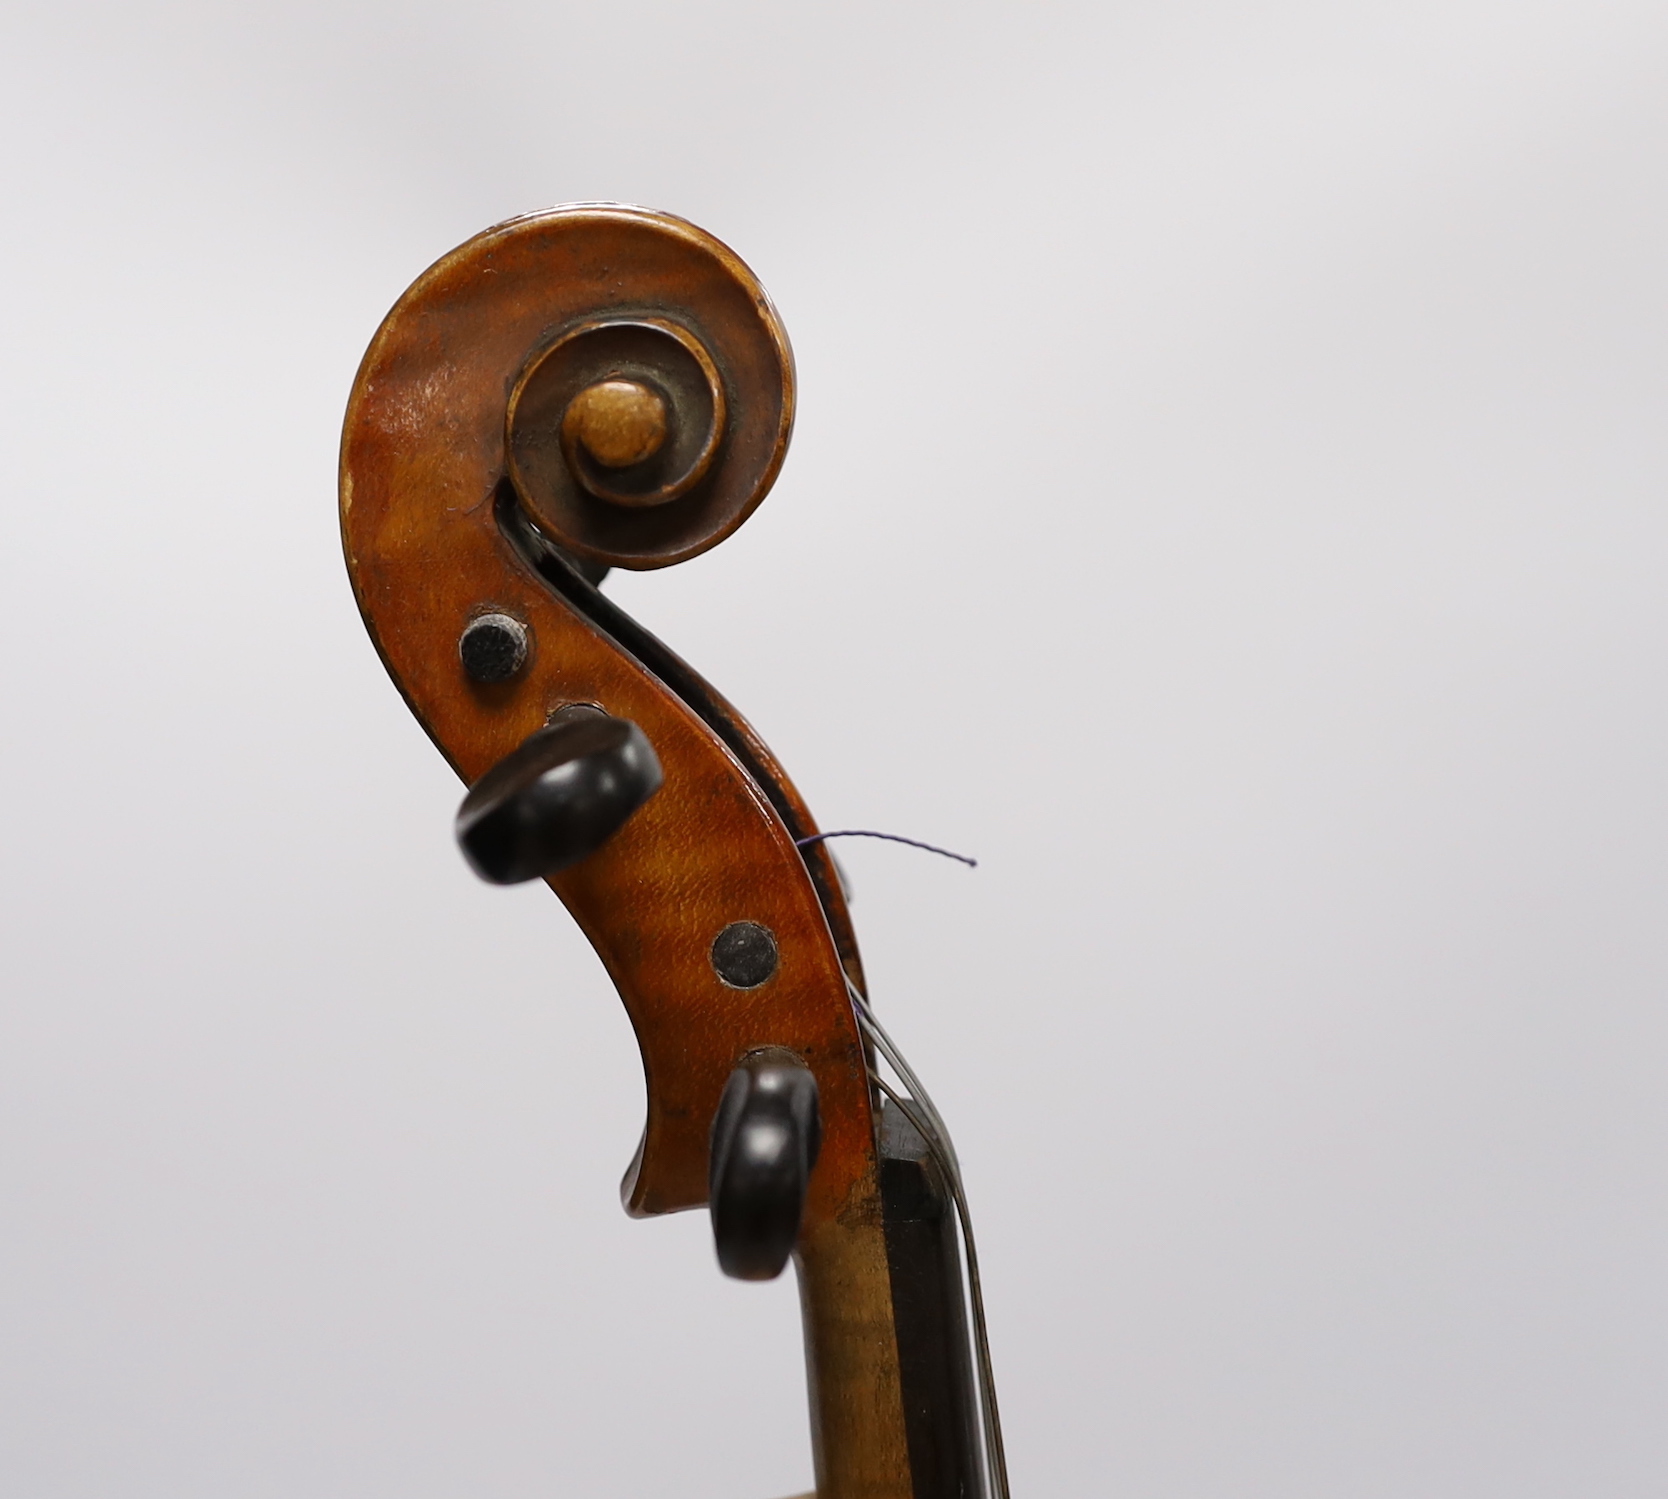 A cased early 20th century French violin, bears Strad label